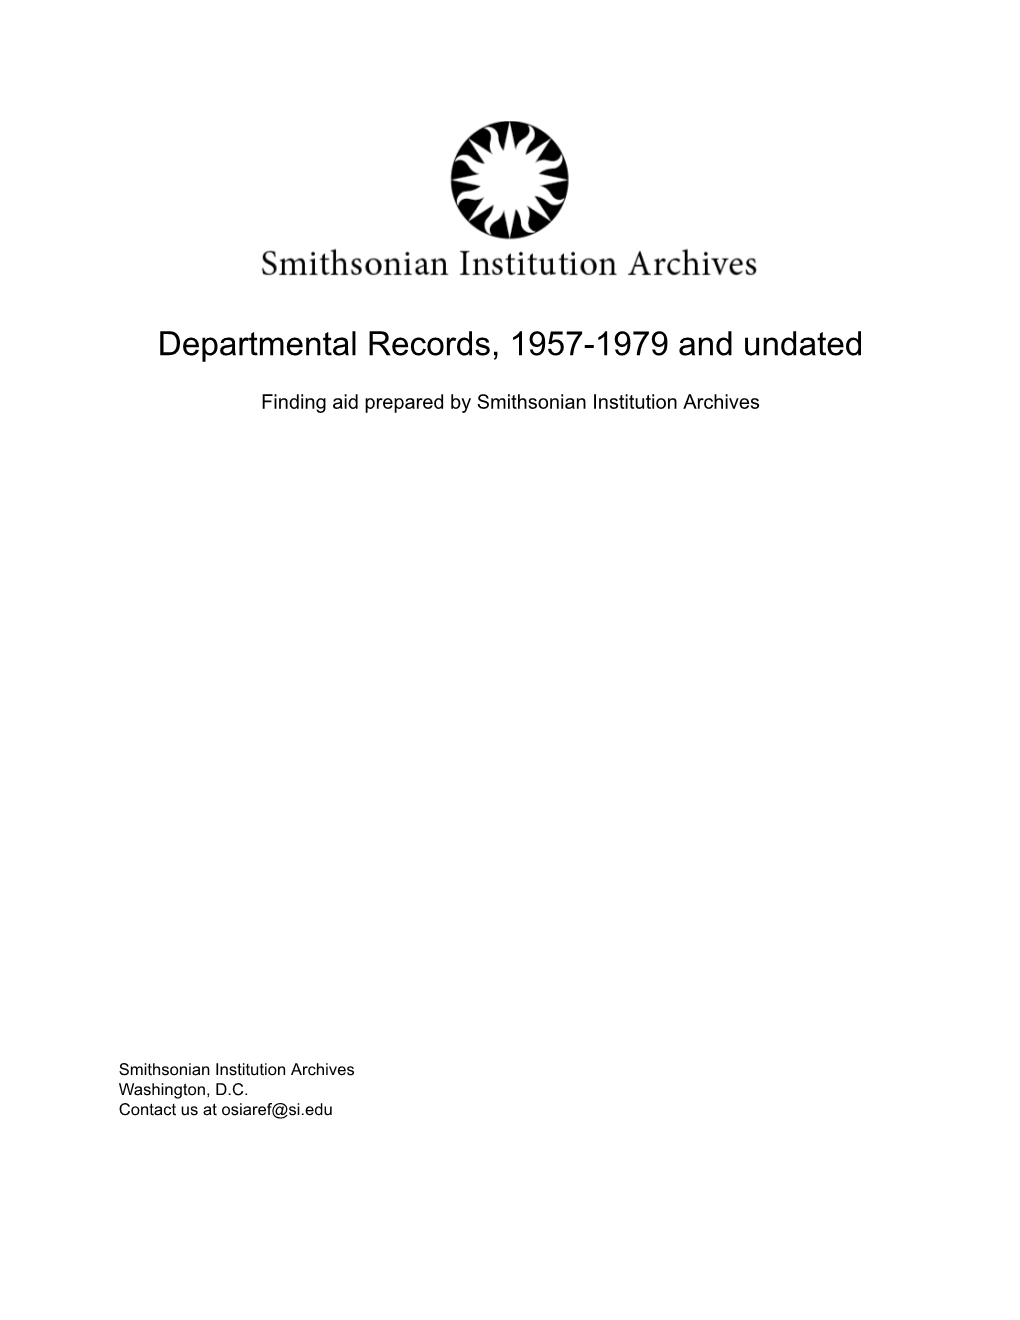 Departmental Records, 1957-1979 and Undated